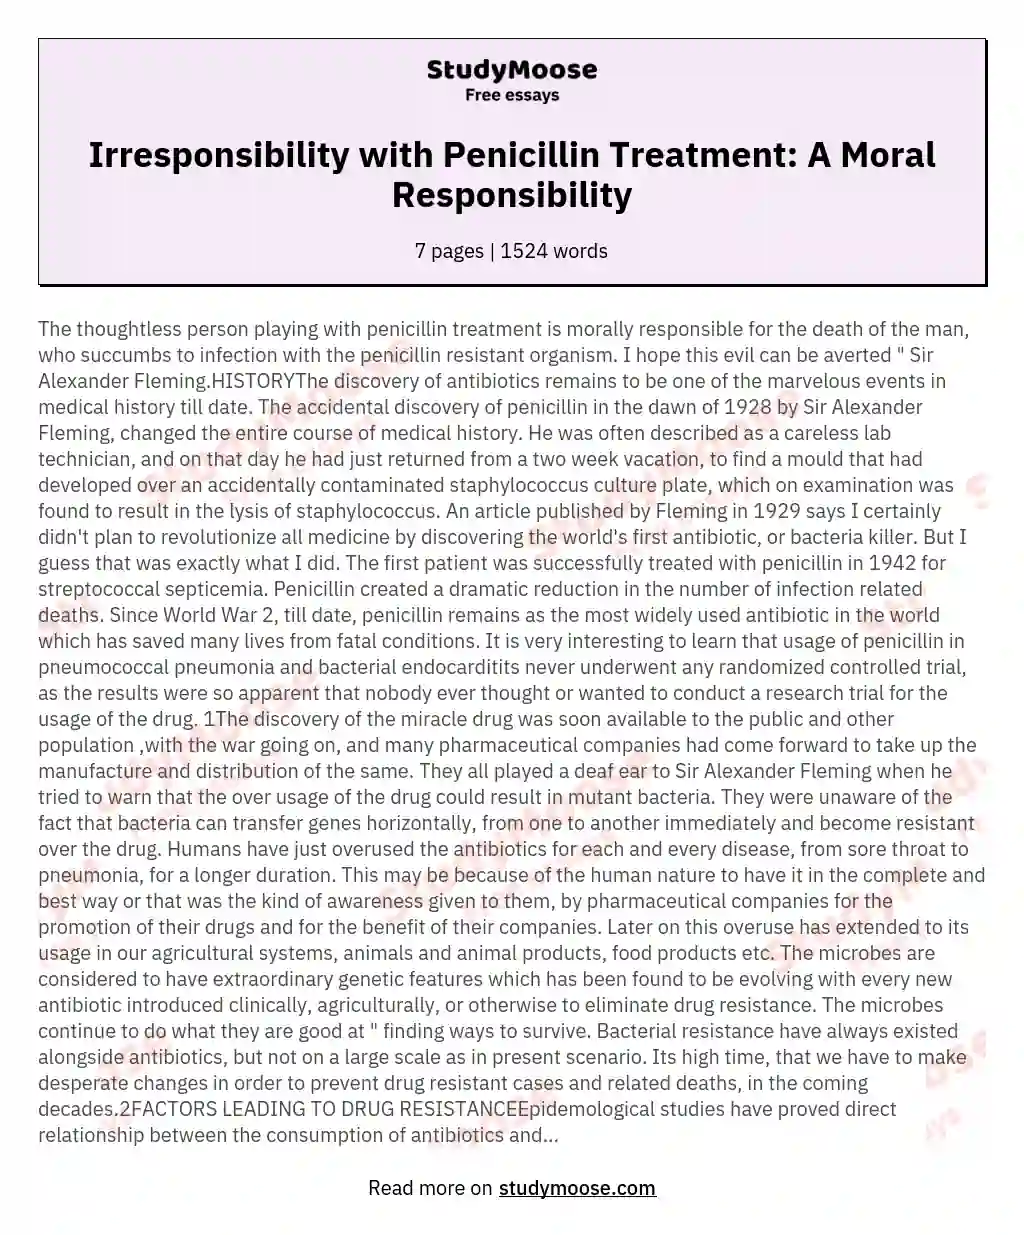 Irresponsibility with Penicillin Treatment: A Moral Responsibility essay